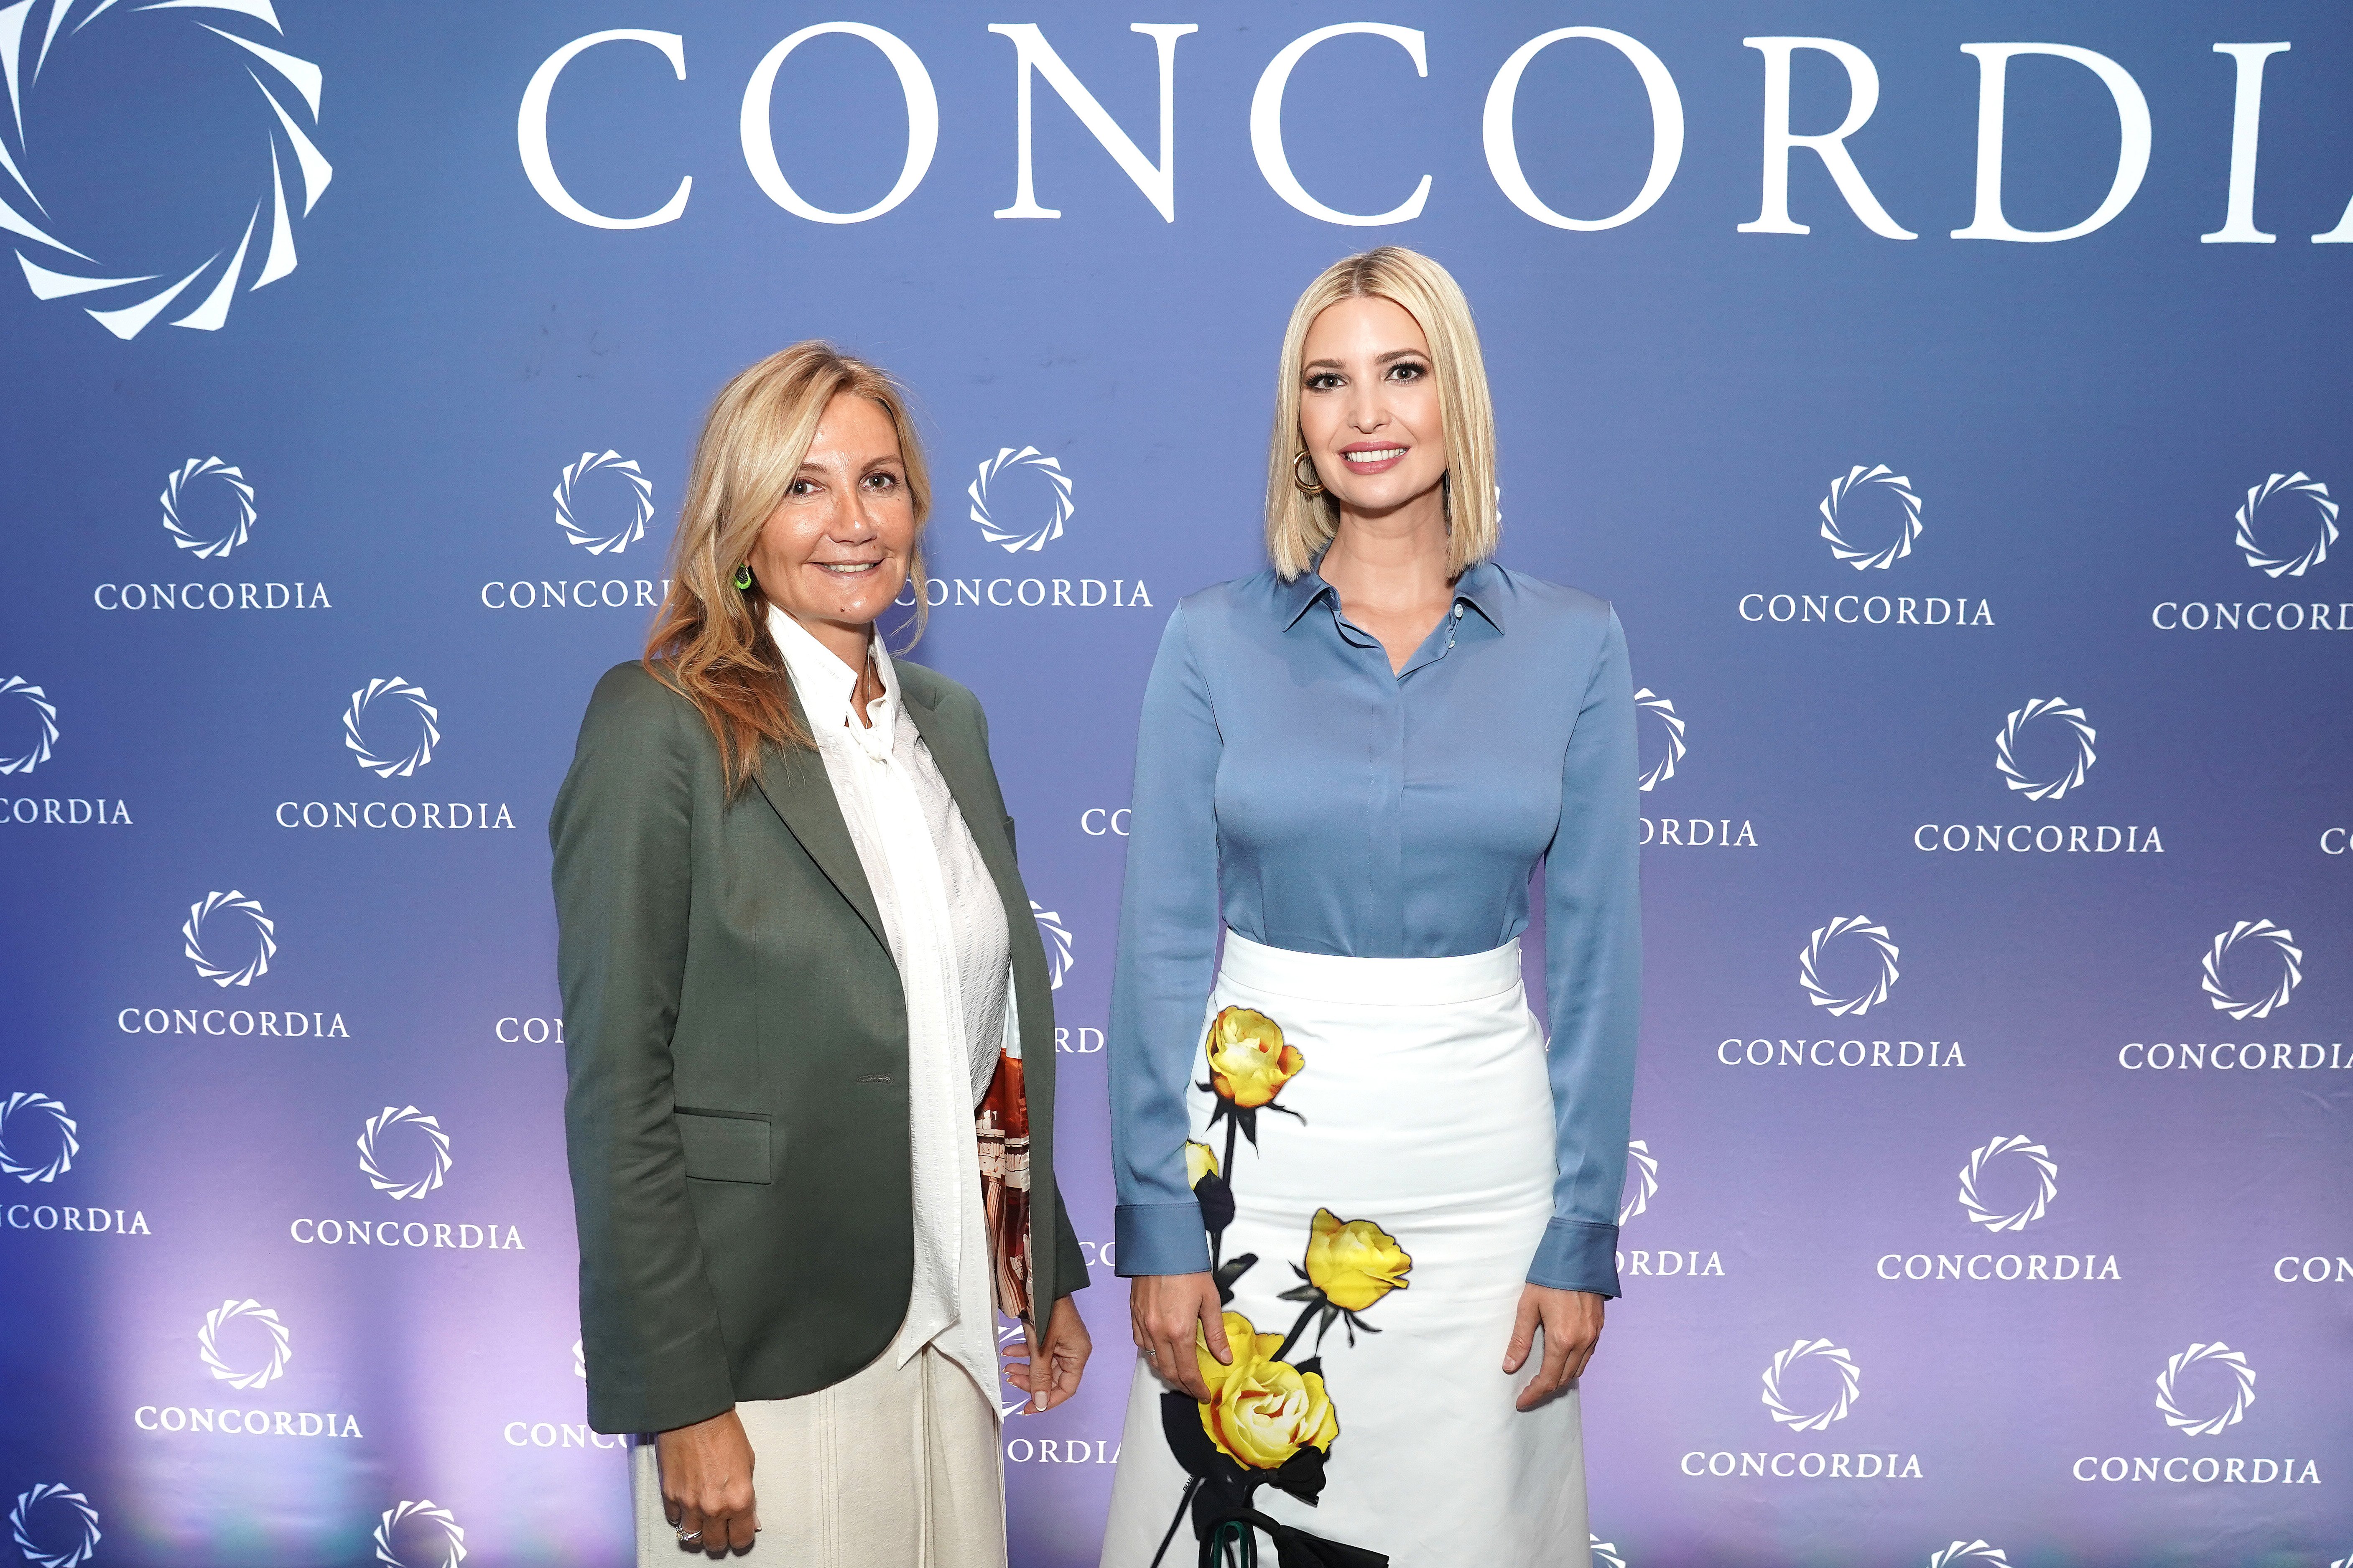 First Lady of Greece, Mareva Grabowski-Mitsotakis and Advisor to the President Ivanka Trump pose for a picture during the 2019 Concordia Annual Summit - Day 1 at Grand Hyatt New York on September 23, 2019 in New York City | Photo: Getty Images